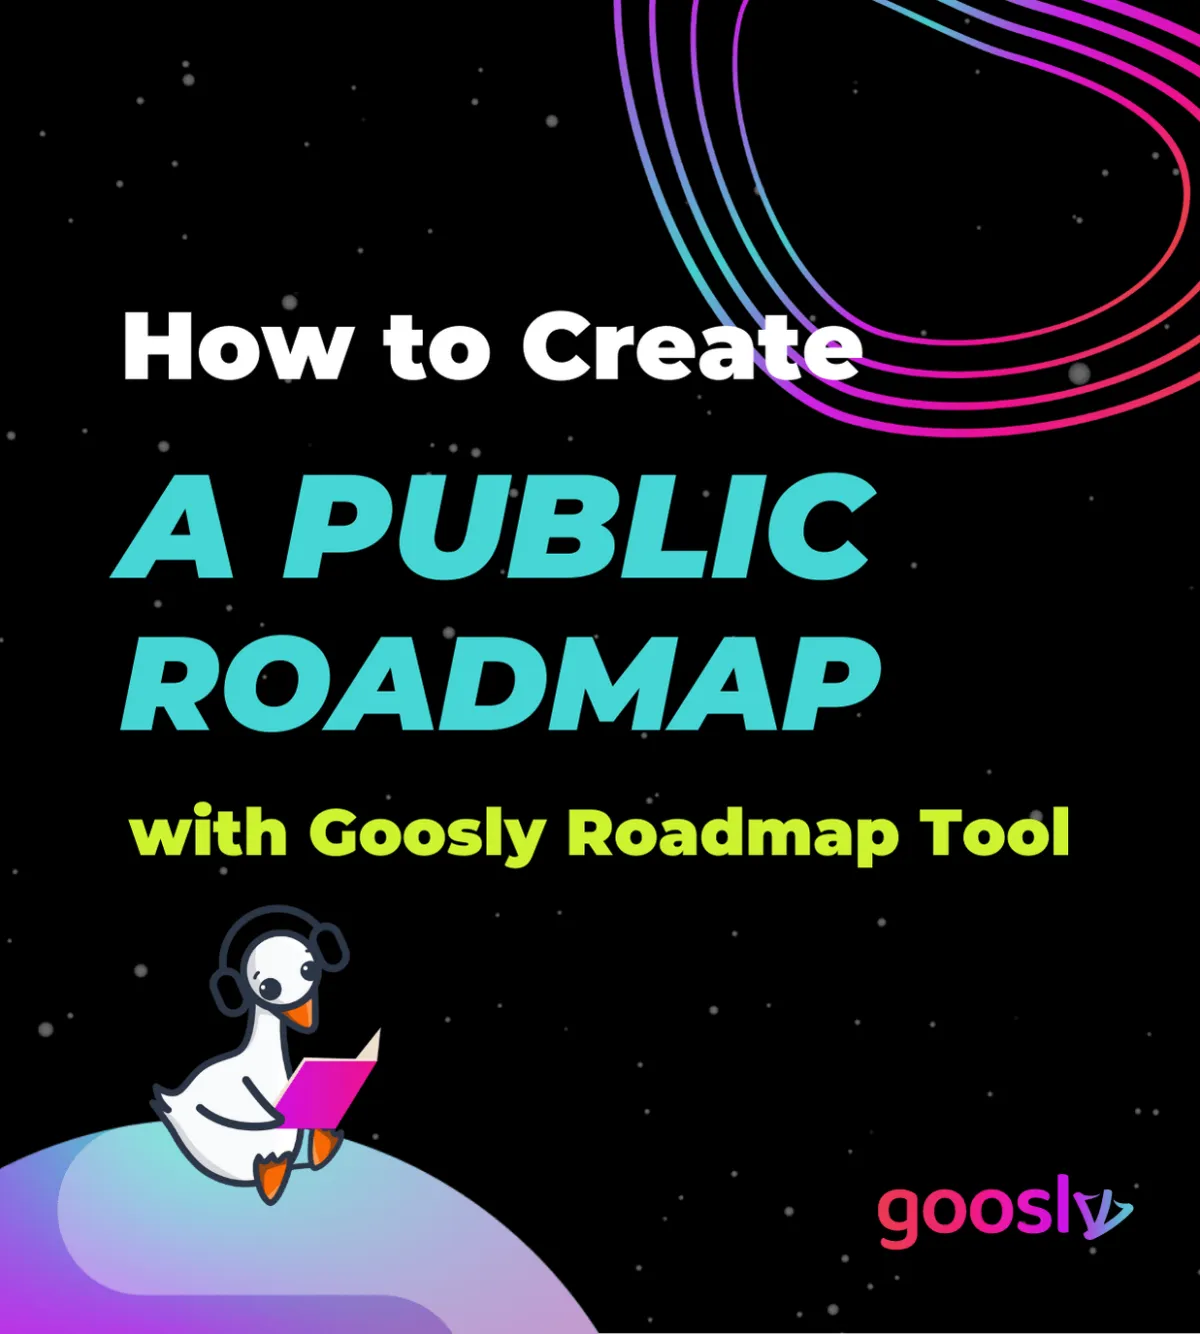 Create a Public Roadmap with the Goosly Public Roadmap Tool